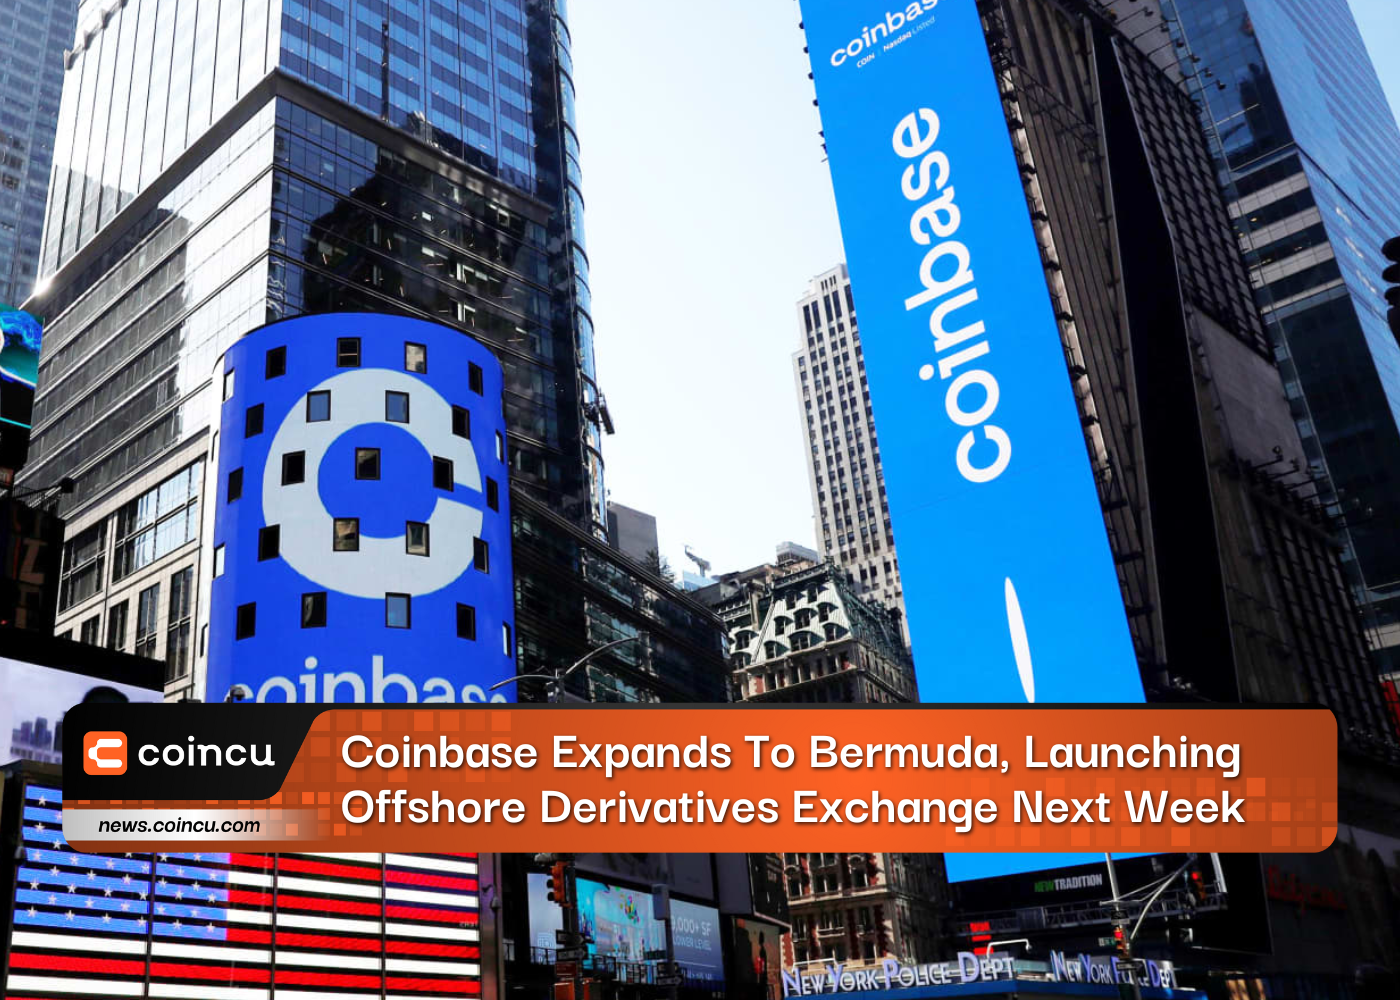 Coinbase Expands To Bermuda, Launching Offshore Derivatives Exchange Next Week